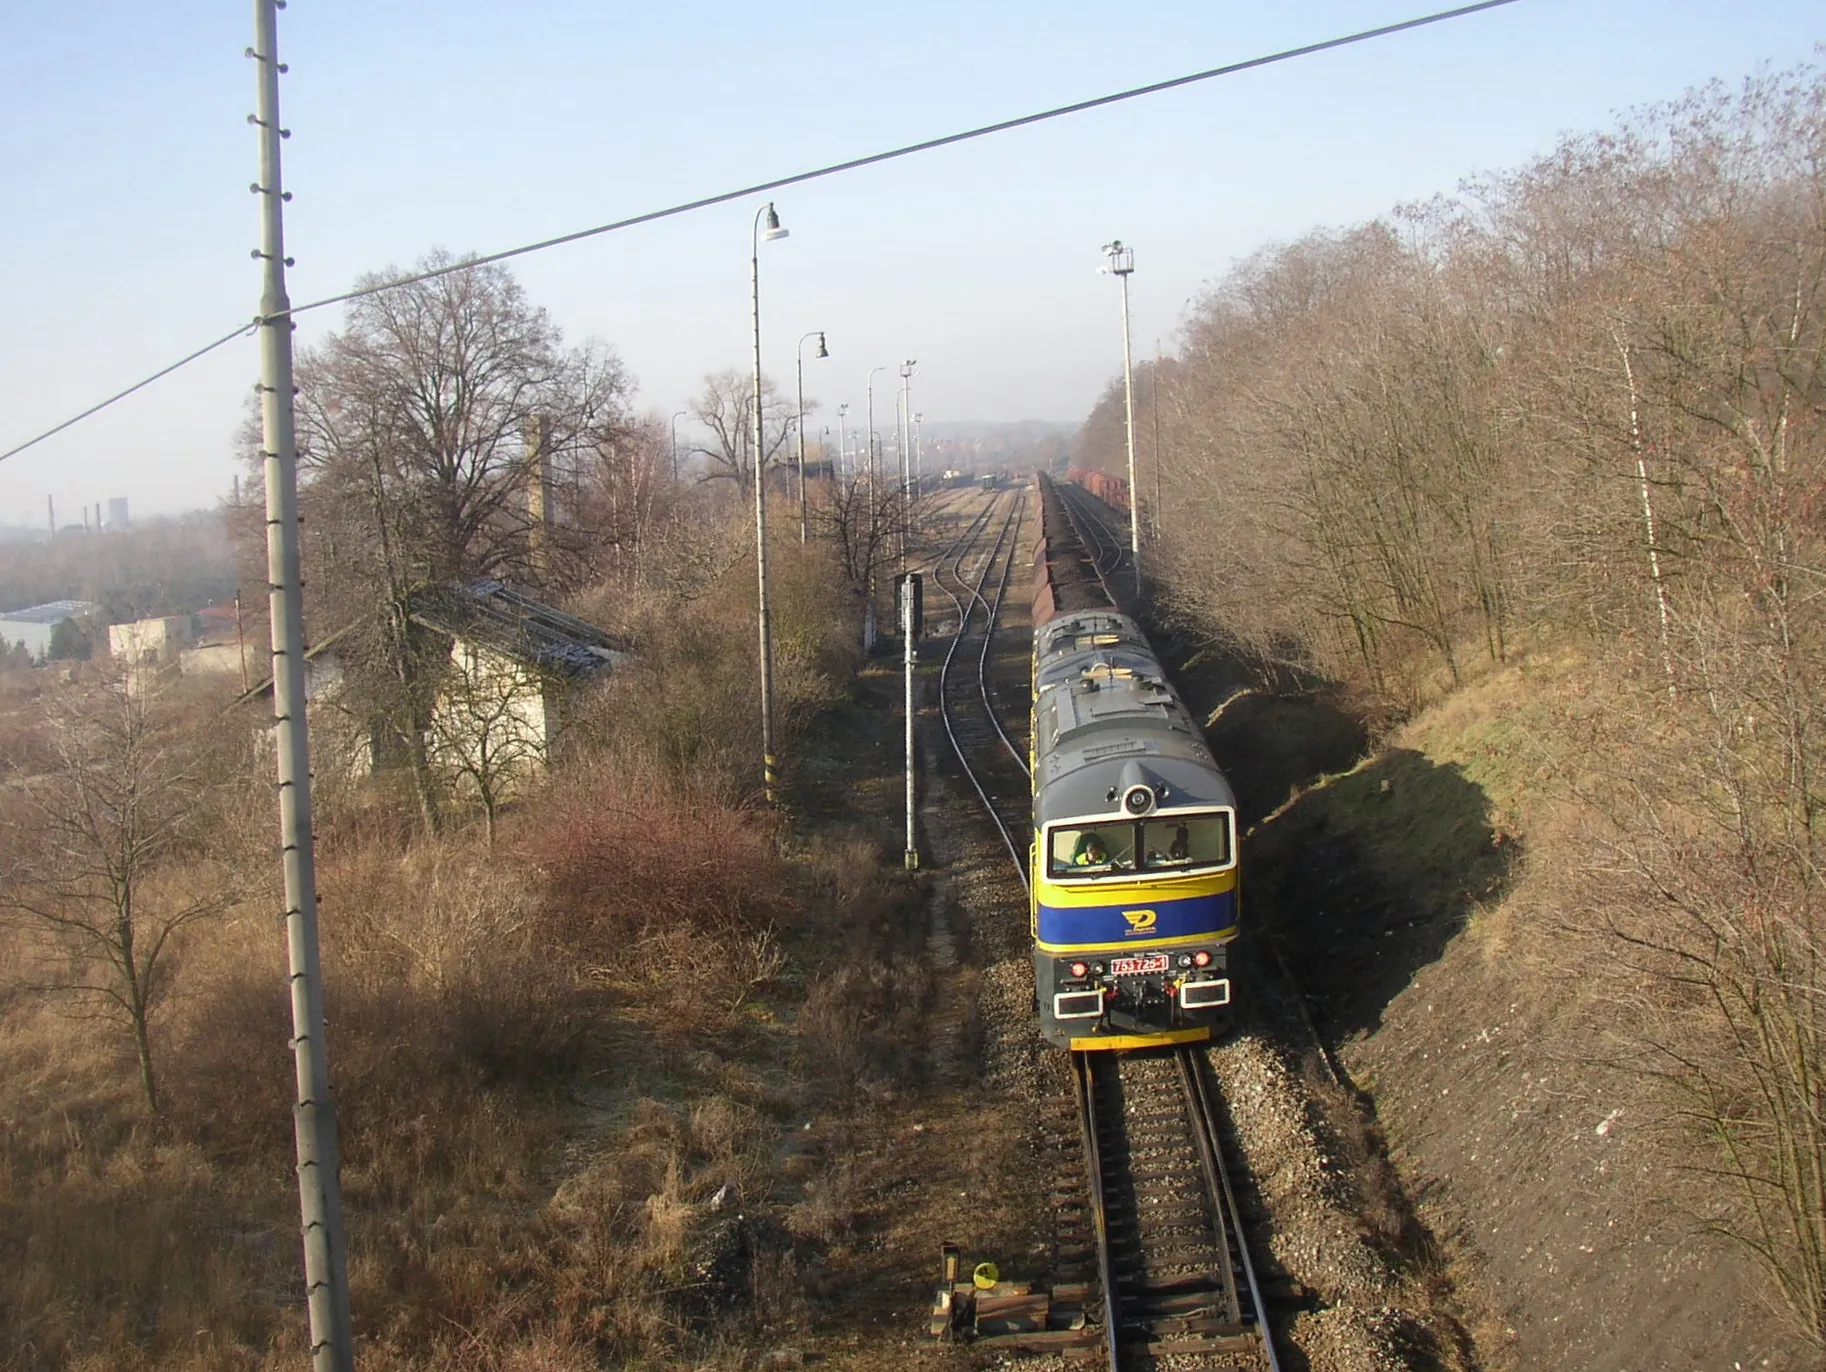 Photo showing: Scheduled freight train with coal from Ledvice for Kladno power plant just has entered Kladno-Dubí railway station on line 093 Kralupy nad Vltavou - Kladno. Coupled Class 753 locomotives in livery of OKD, Doprava company are pushing the tran.